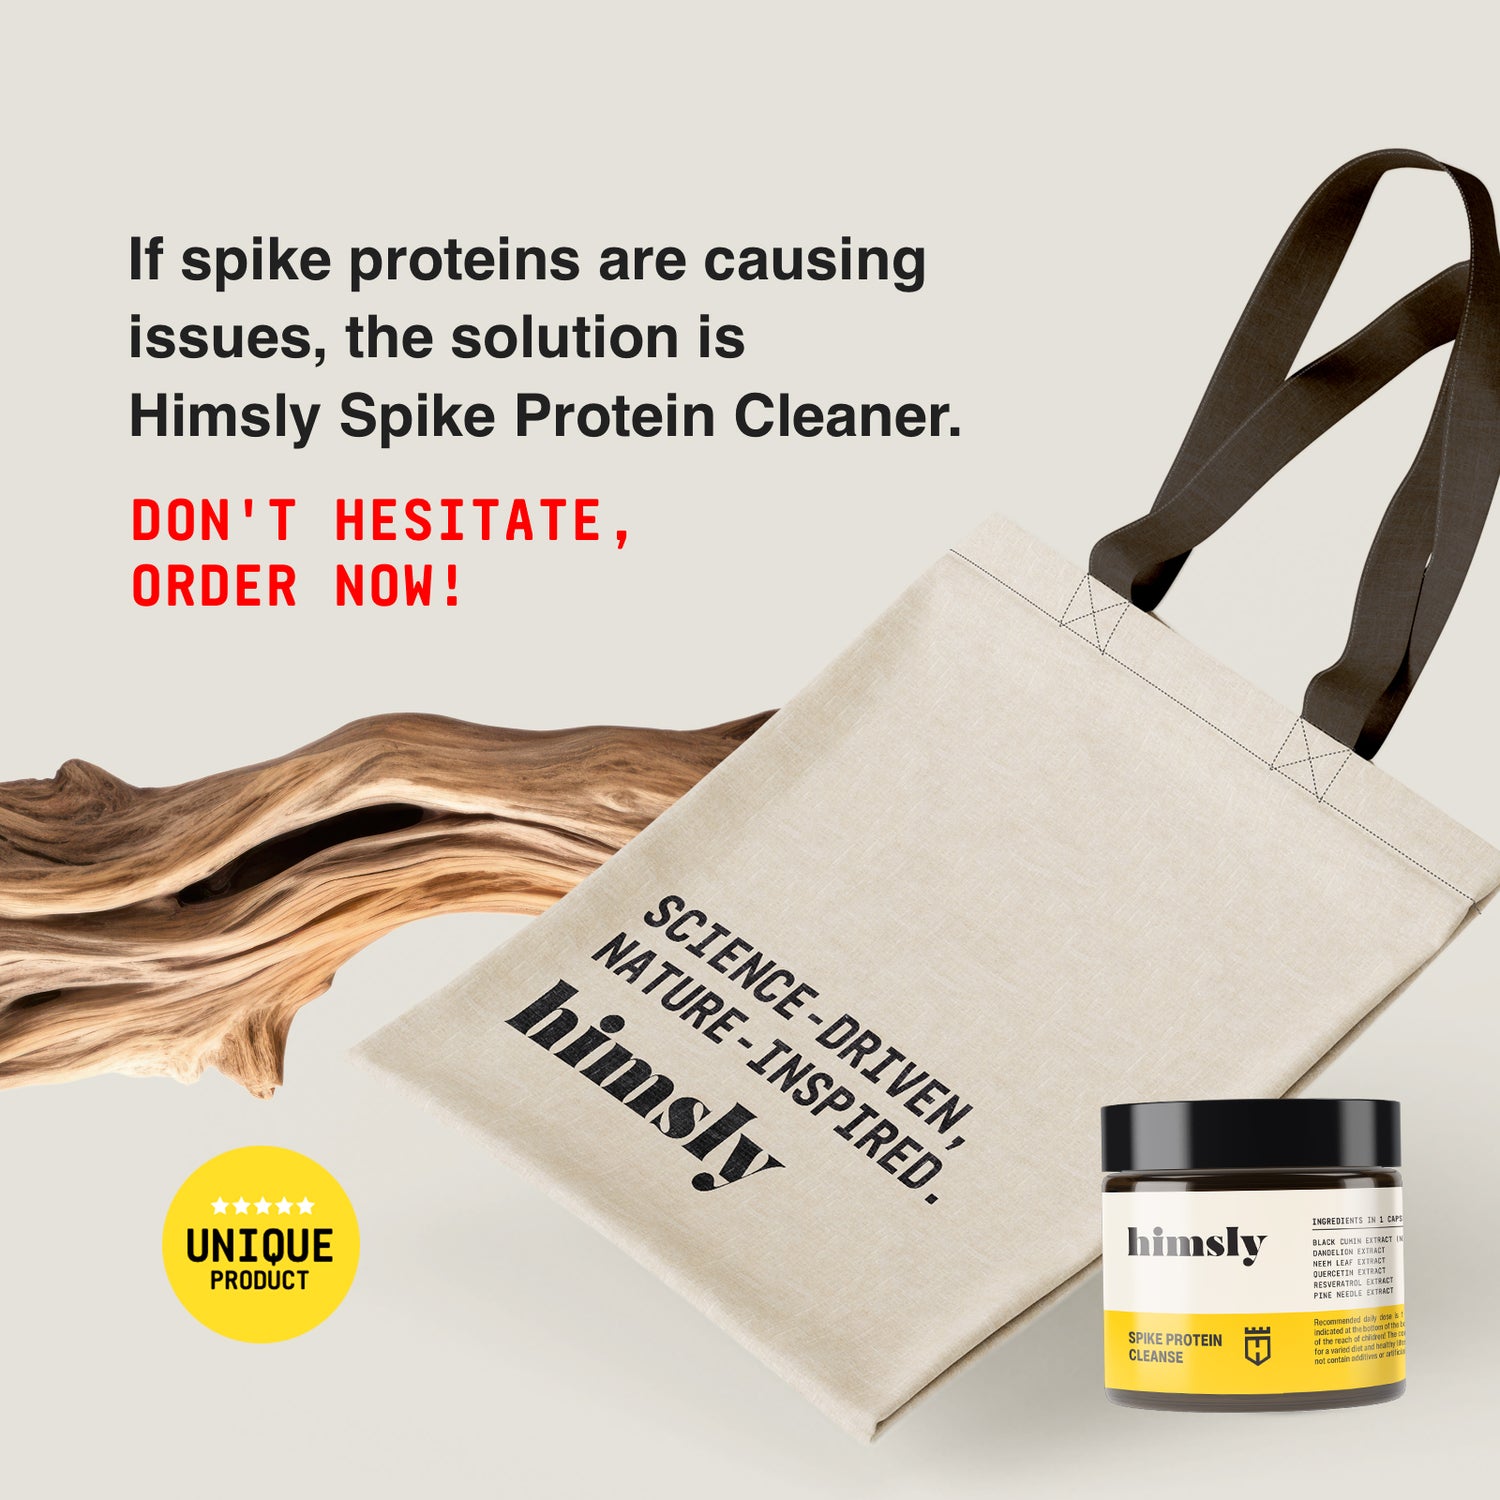 If spike proteins are causing issues, the solution is Himsly Spike Protein Cleaner.